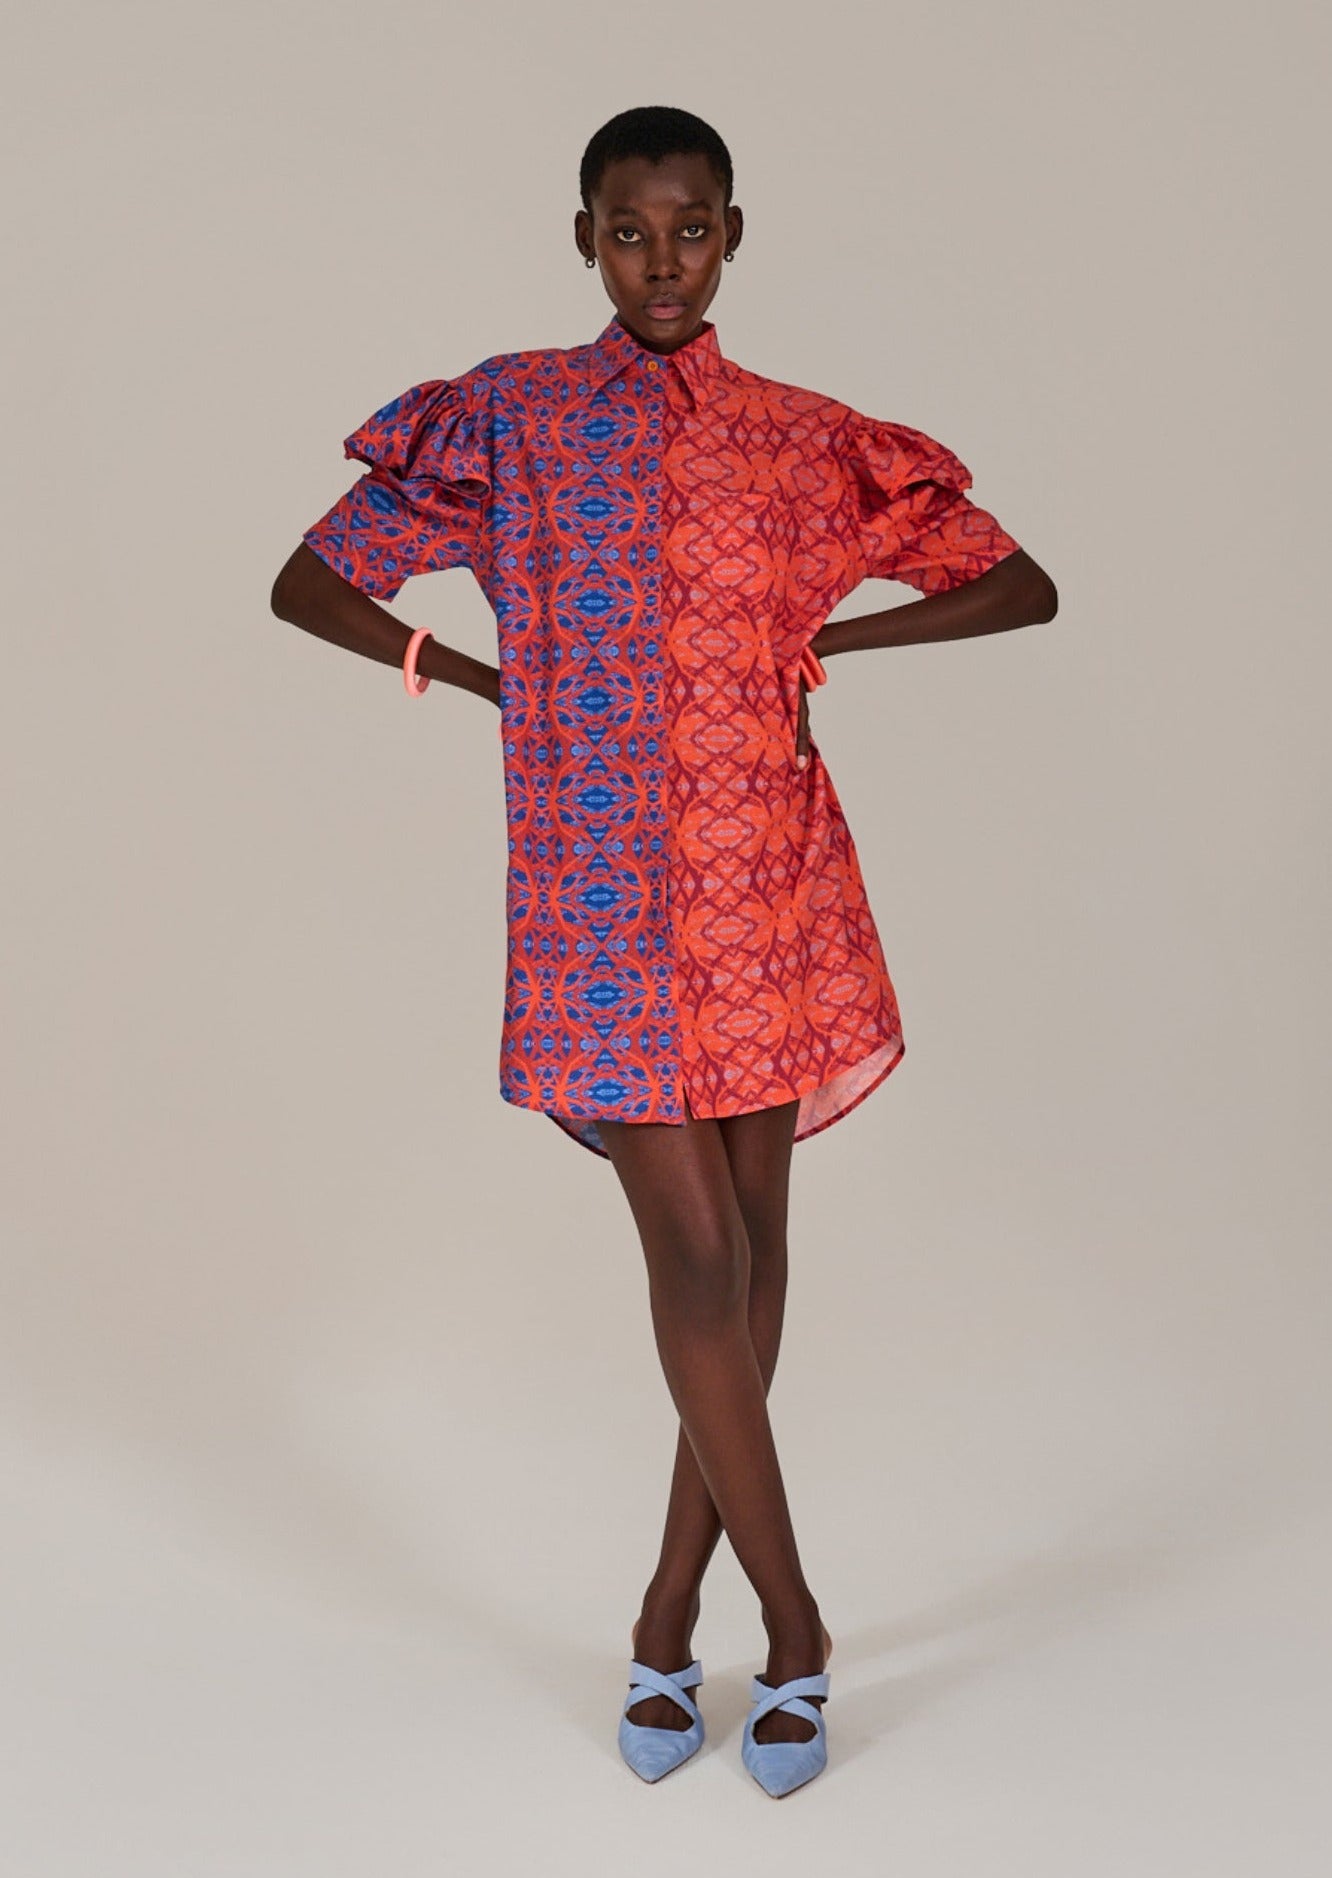 Model standing with hands on hips and crossed legs in the KAHINDO Chinchilla Shirtdress